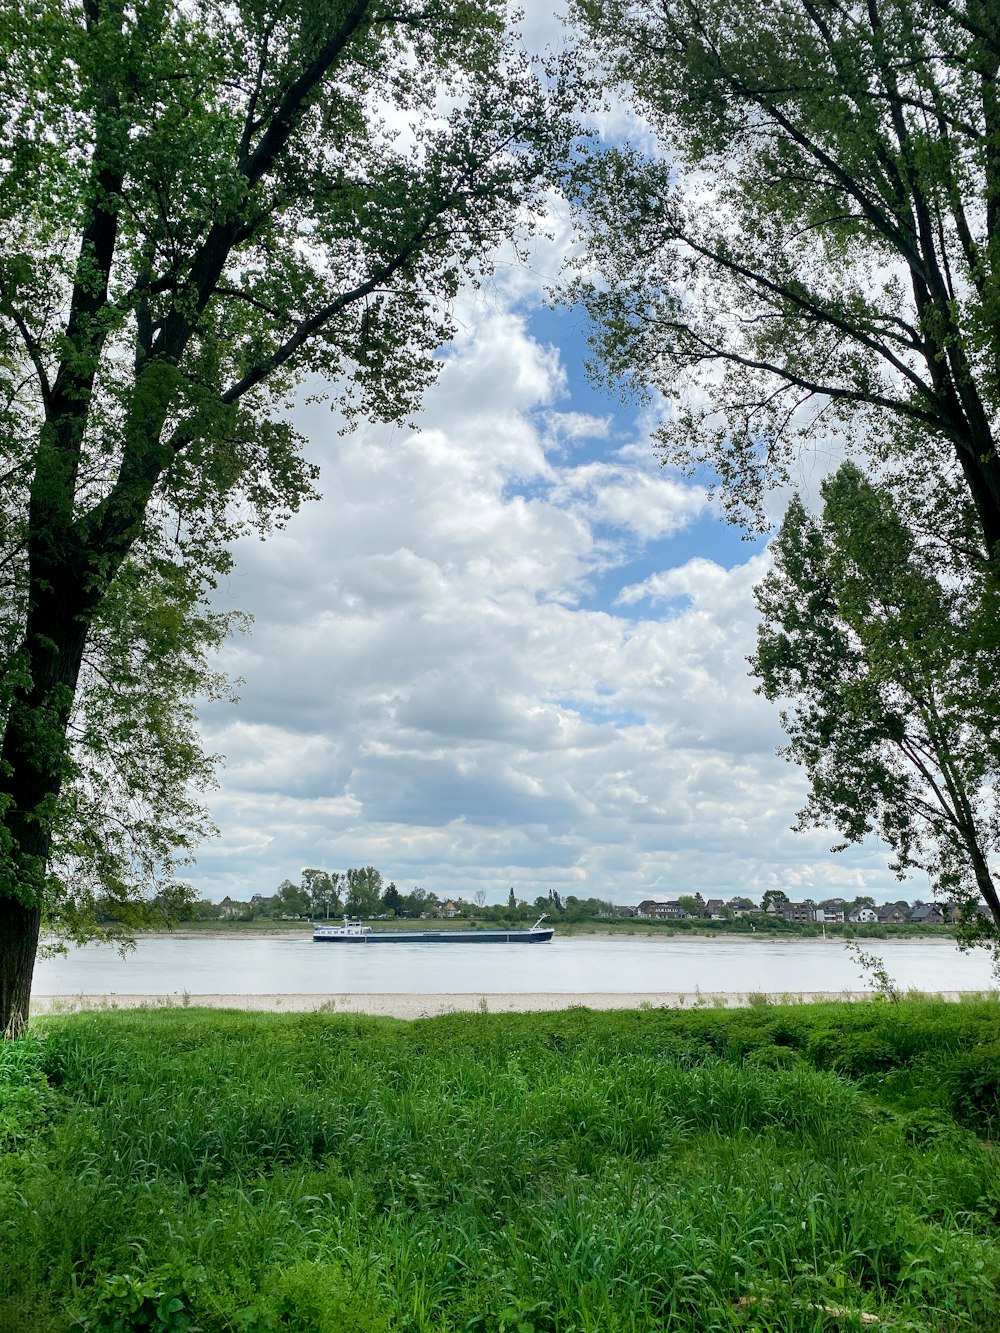 green trees near body of water under white clouds and blue sky during daytime